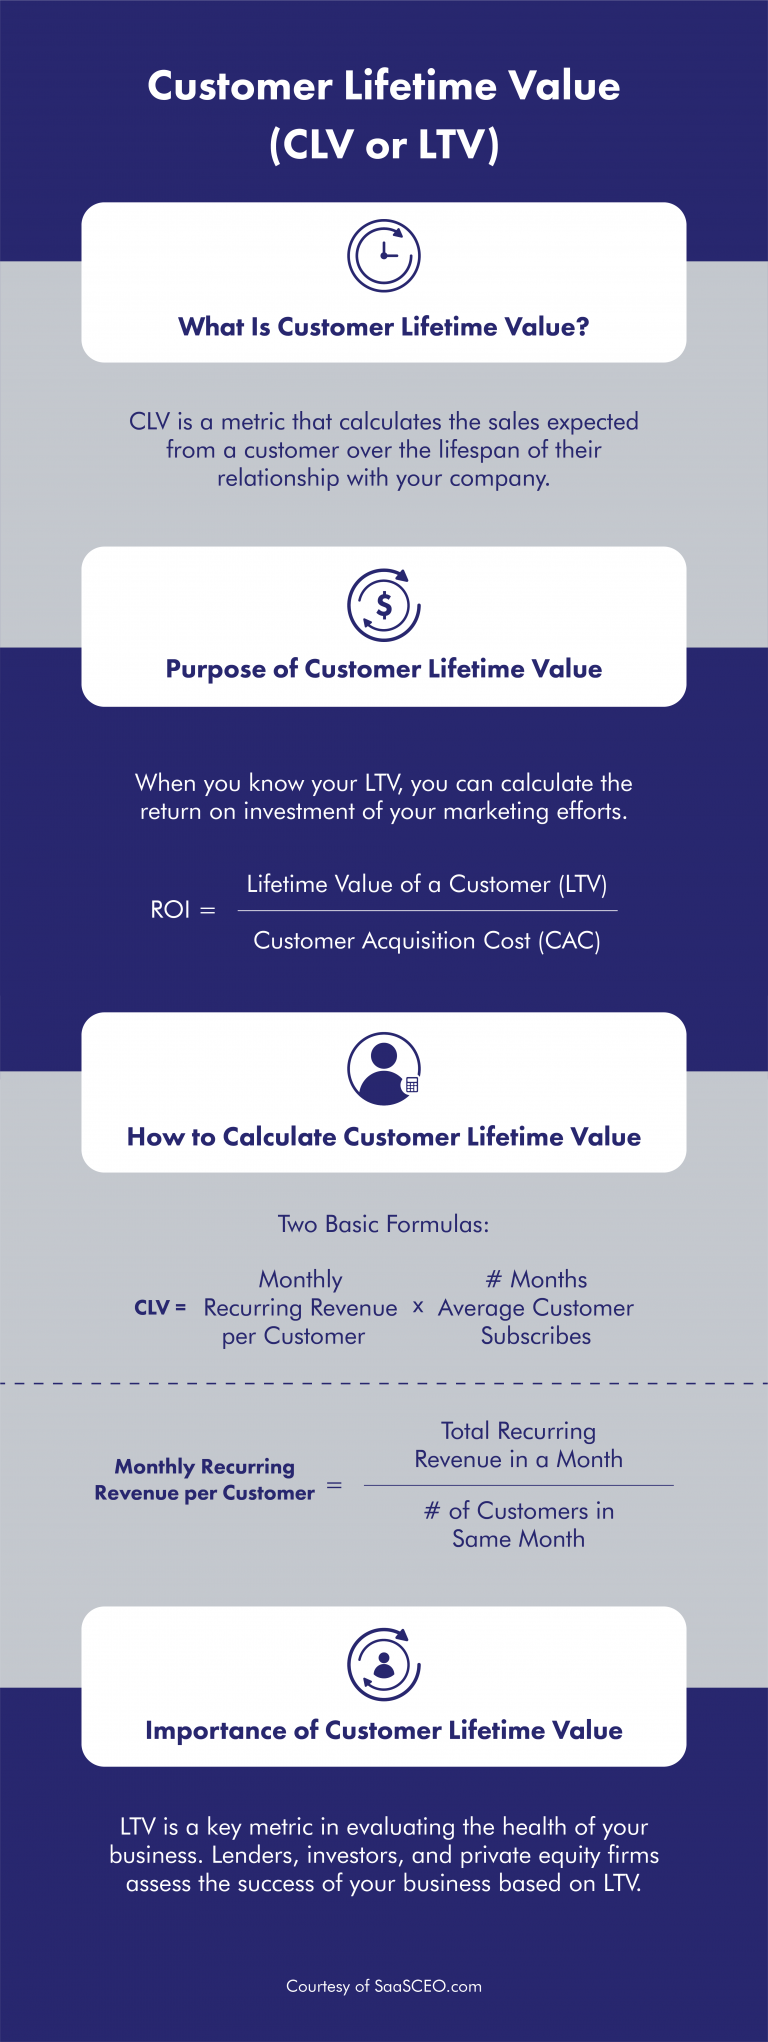 What is LTV in SaaS